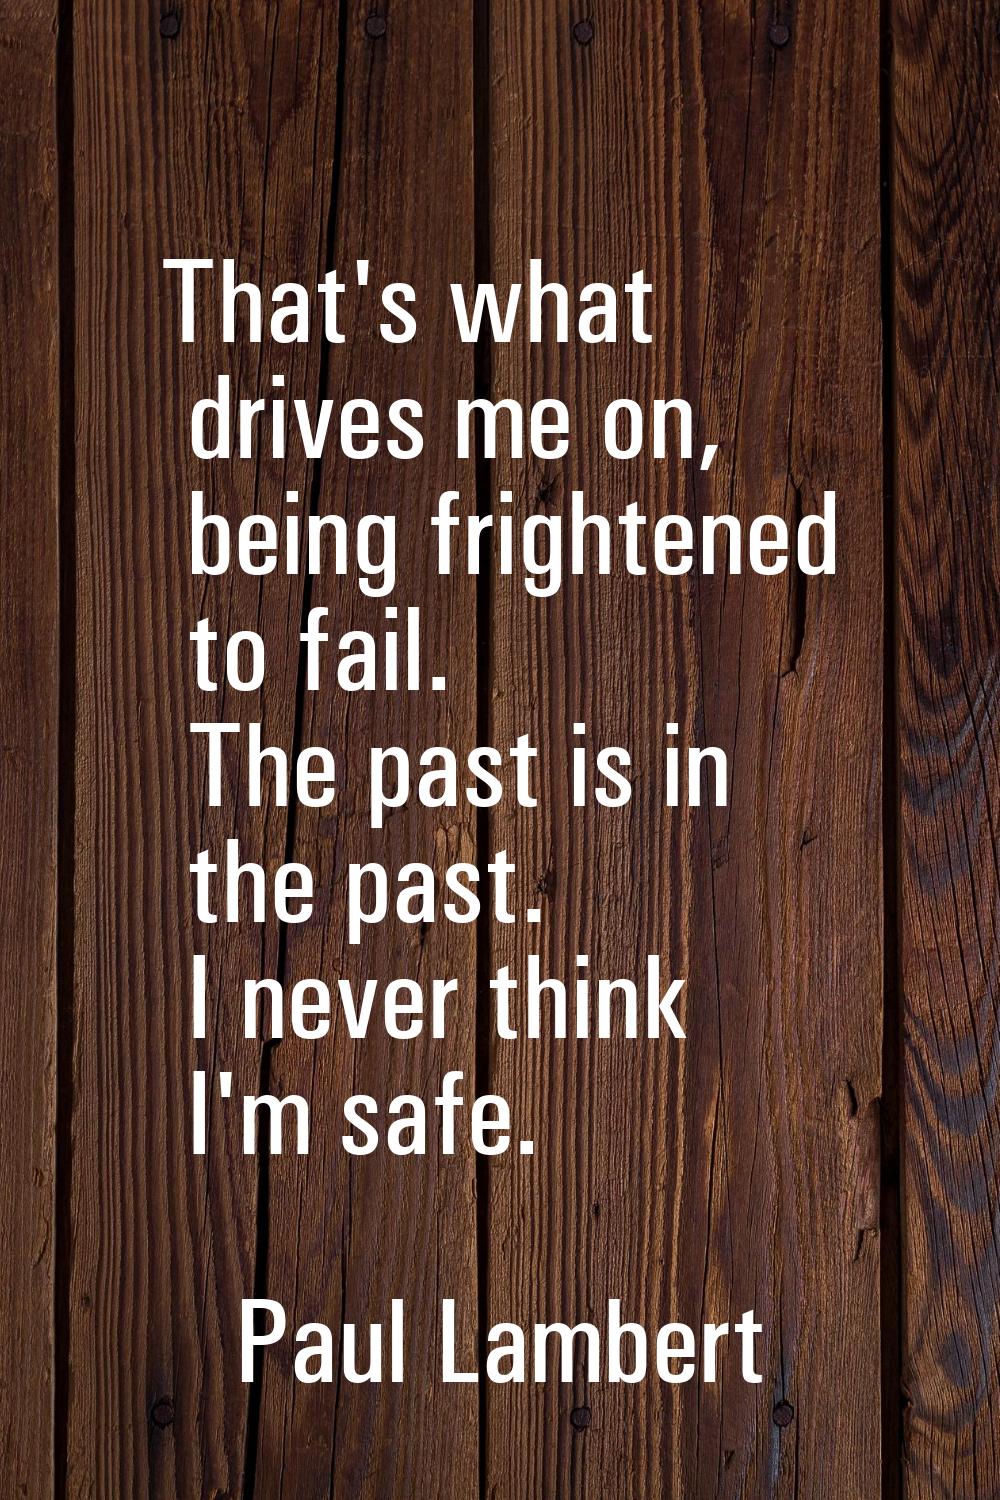 That's what drives me on, being frightened to fail. The past is in the past. I never think I'm safe